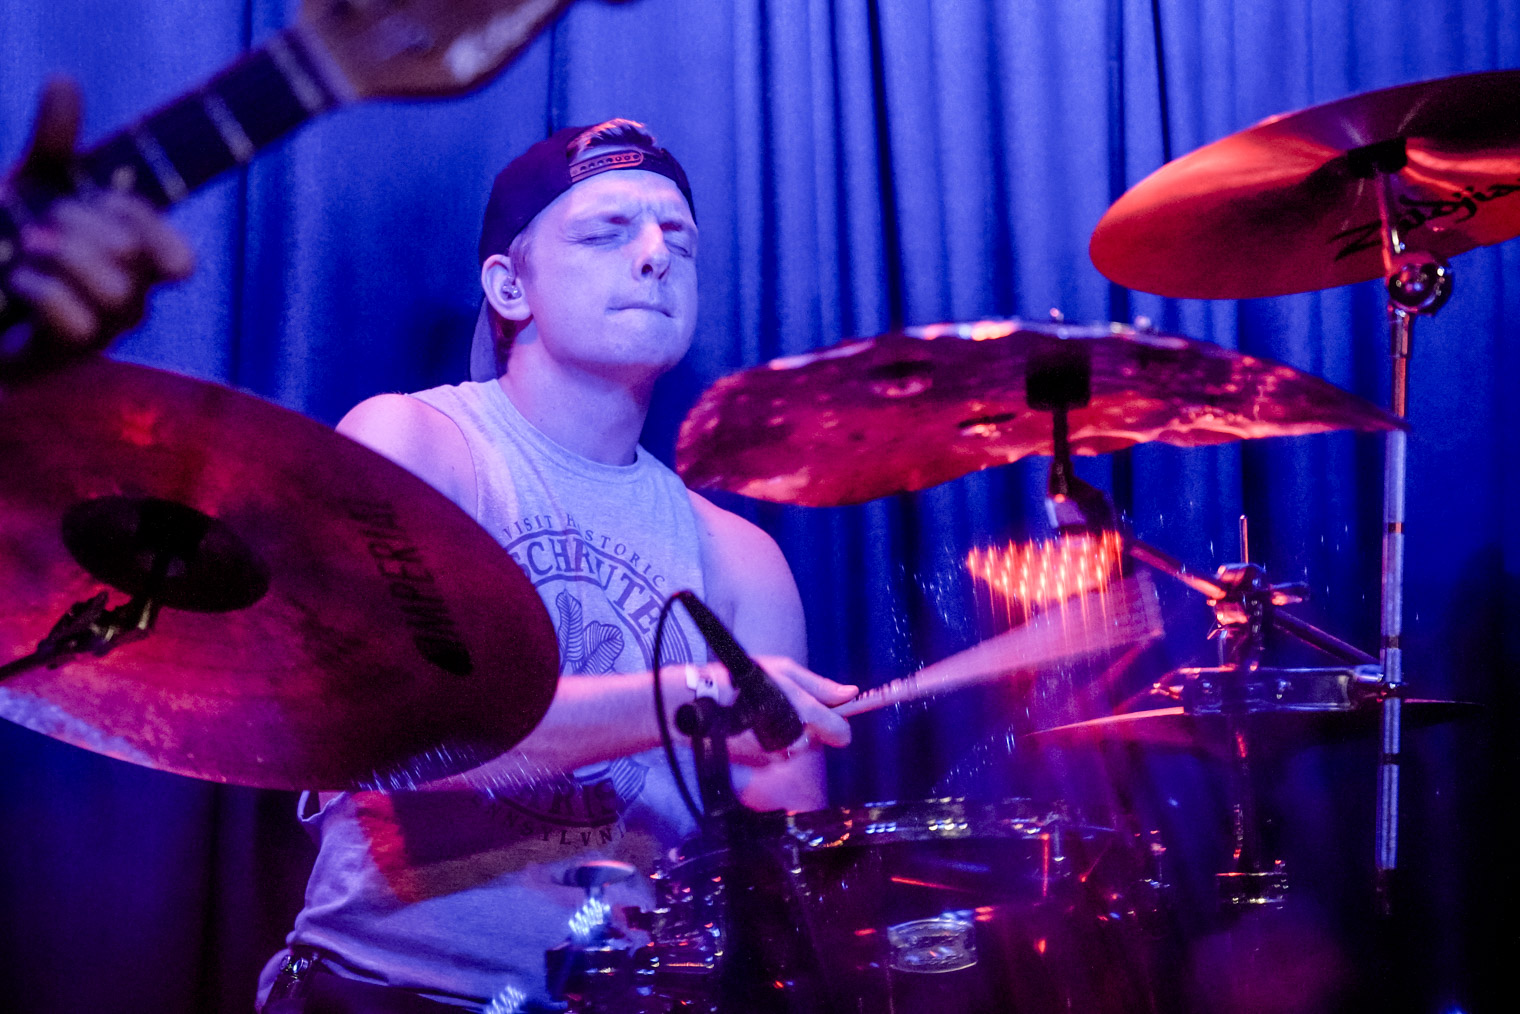 A drummer on stage